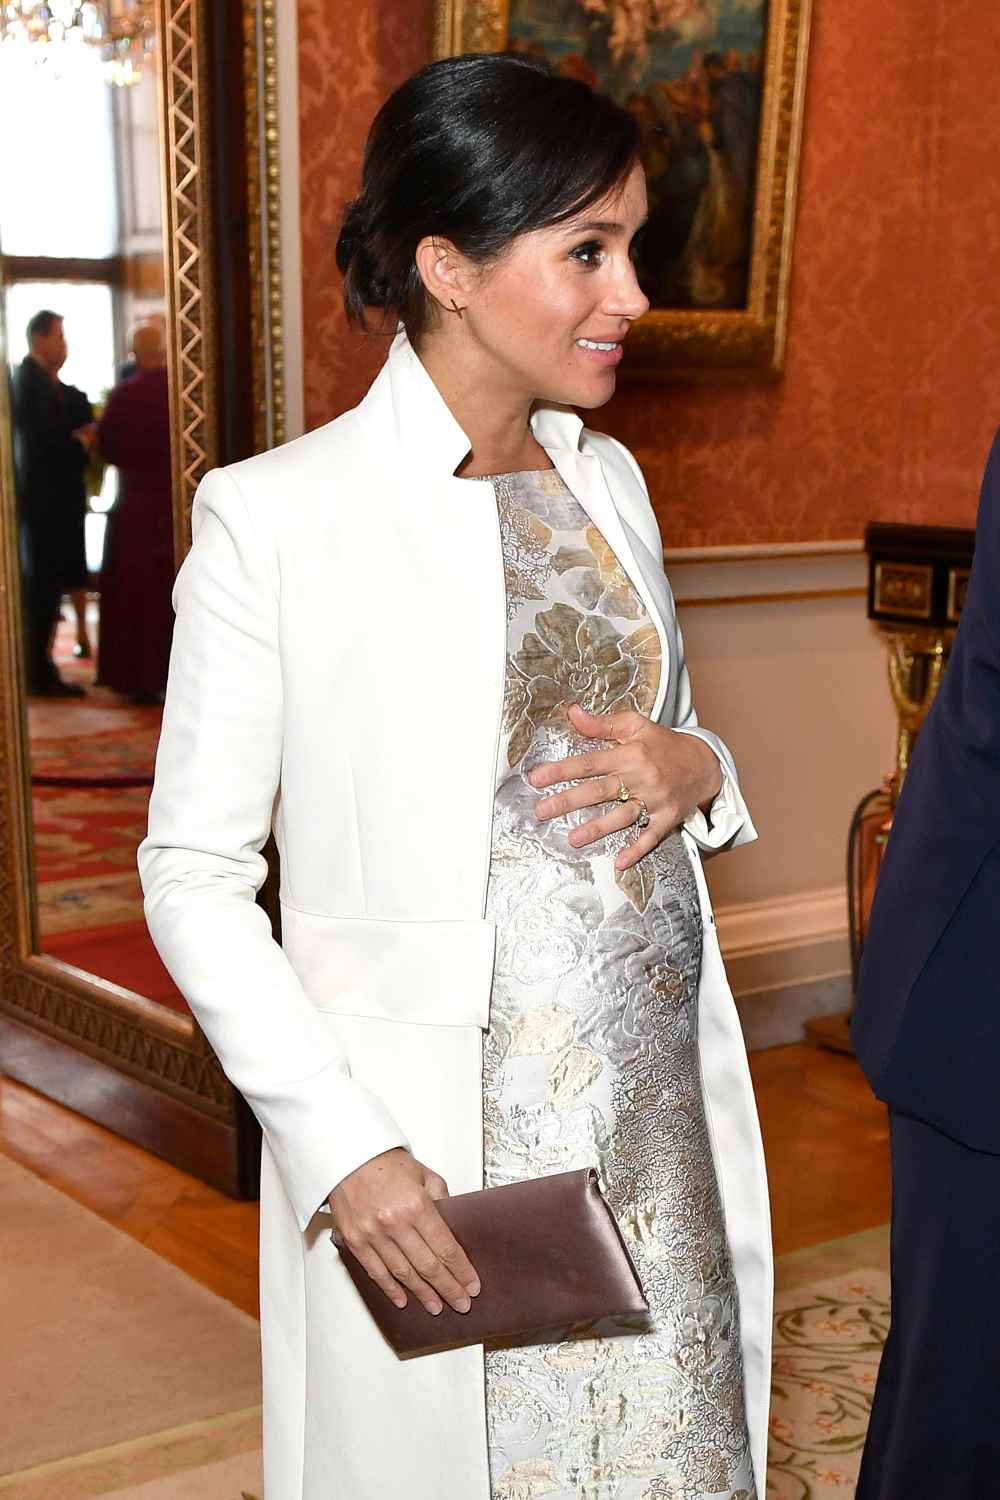 Almost a Mom! Pregnant Duchess Meghan Says She's 'Nearly There'